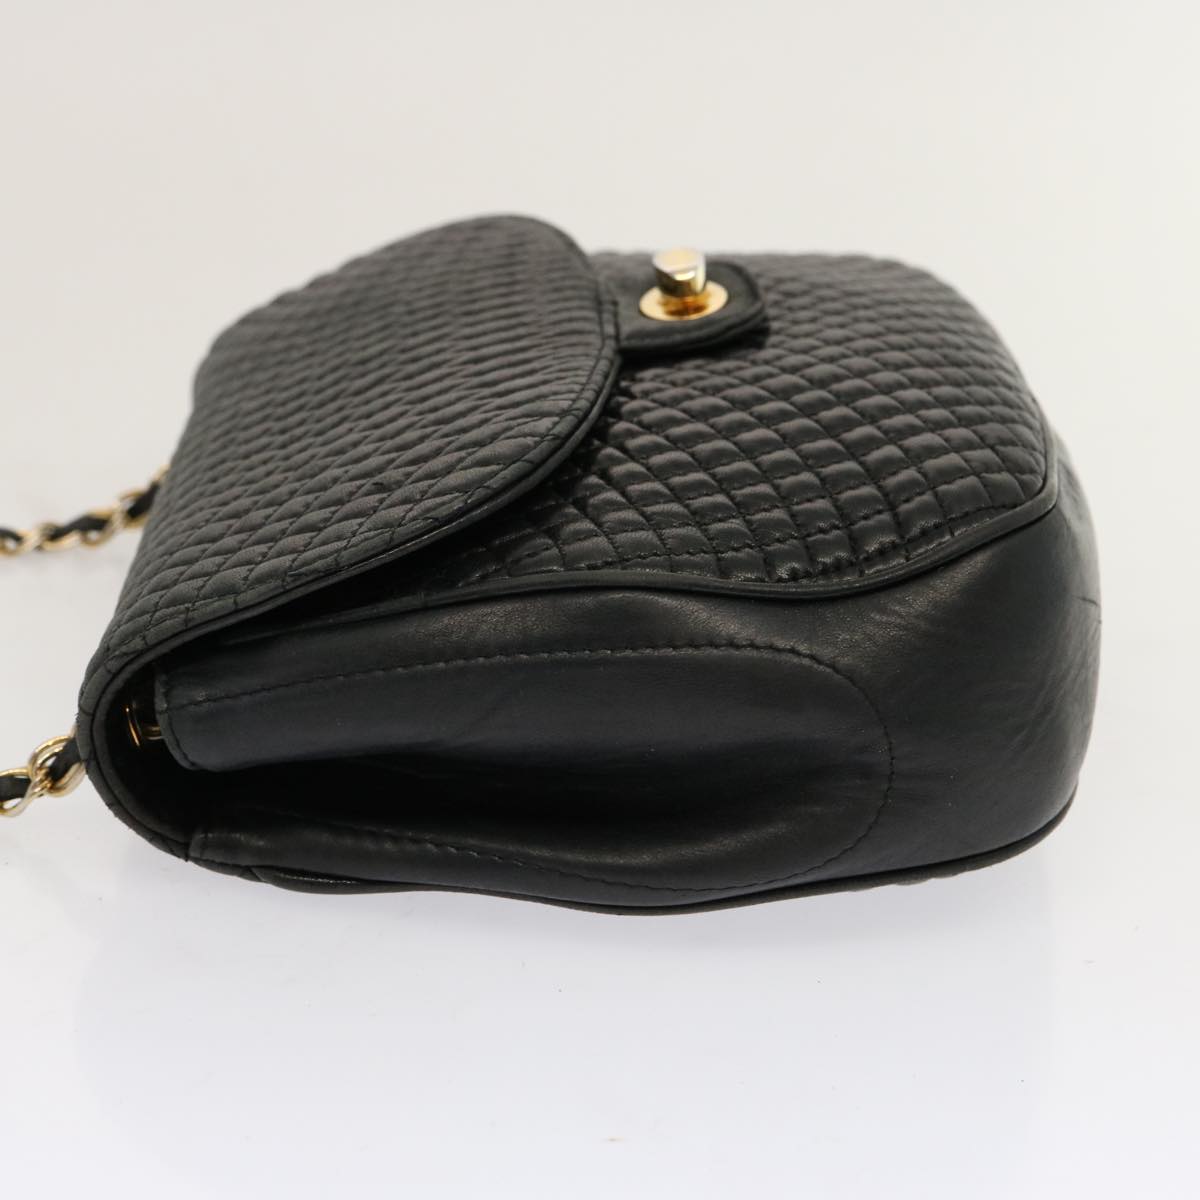 BALLY Quilted Chain Shoulder Bag Leather Black Auth mr022